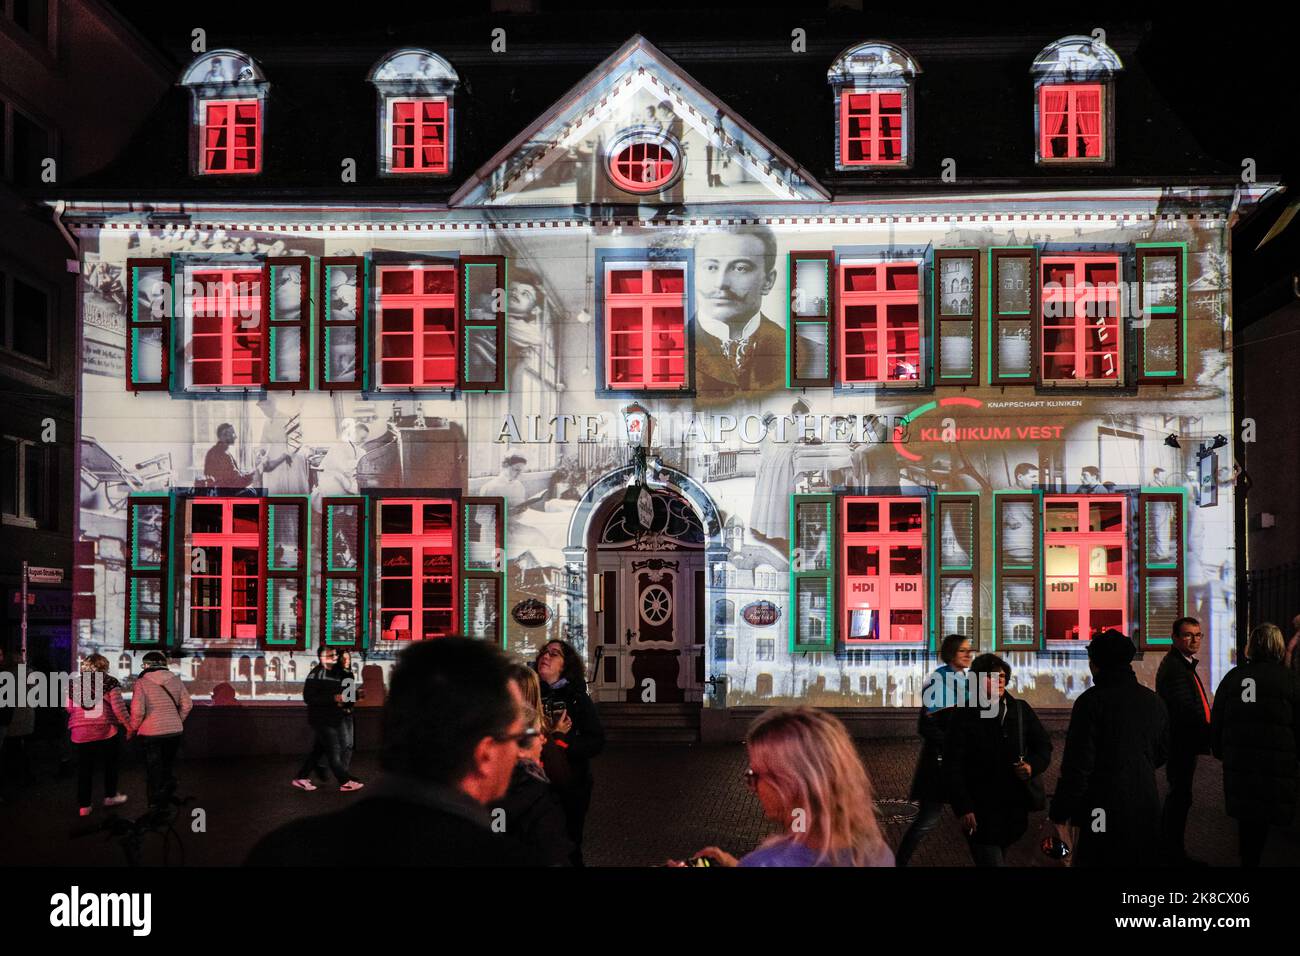 Recklinghausen, NRW, Germany. 22nd Oct, 2022. A medical history projection on a pharmacy building. Over 160 buildings and landmarks are illuminated with colourful lights and projections in the annual 'Recklinghausen Leuchtet' lights festival, which proves popular in the old town of Recklinghausen. The festival runs until November 6th. Credit: Imageplotter/Alamy Live News Stock Photo